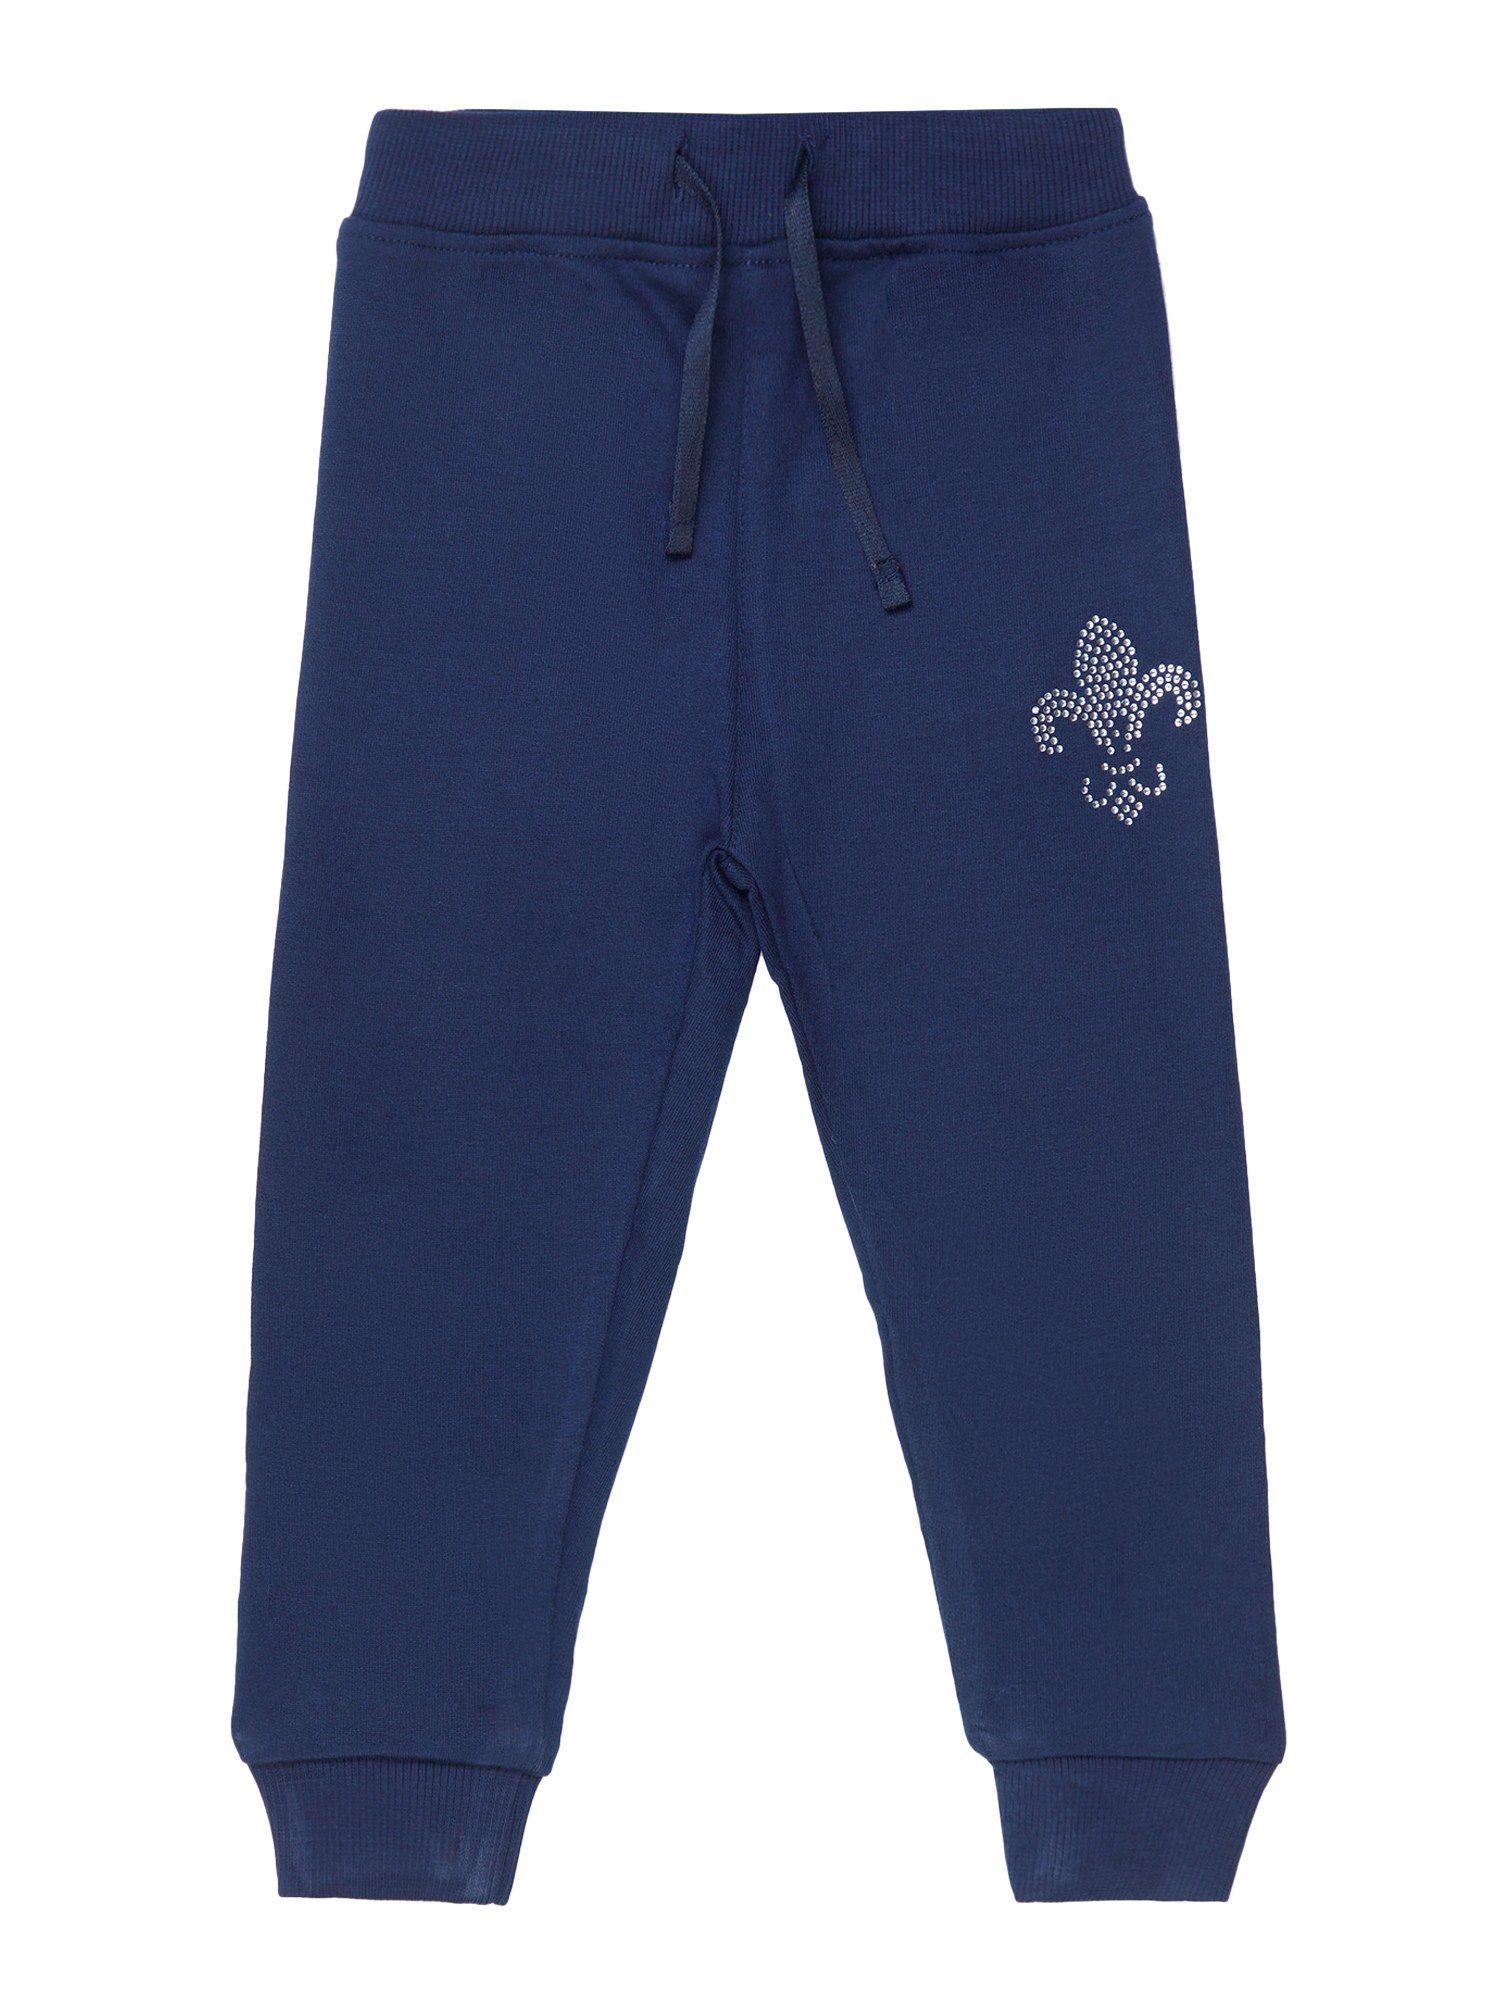 solid navy blue joggers for girls